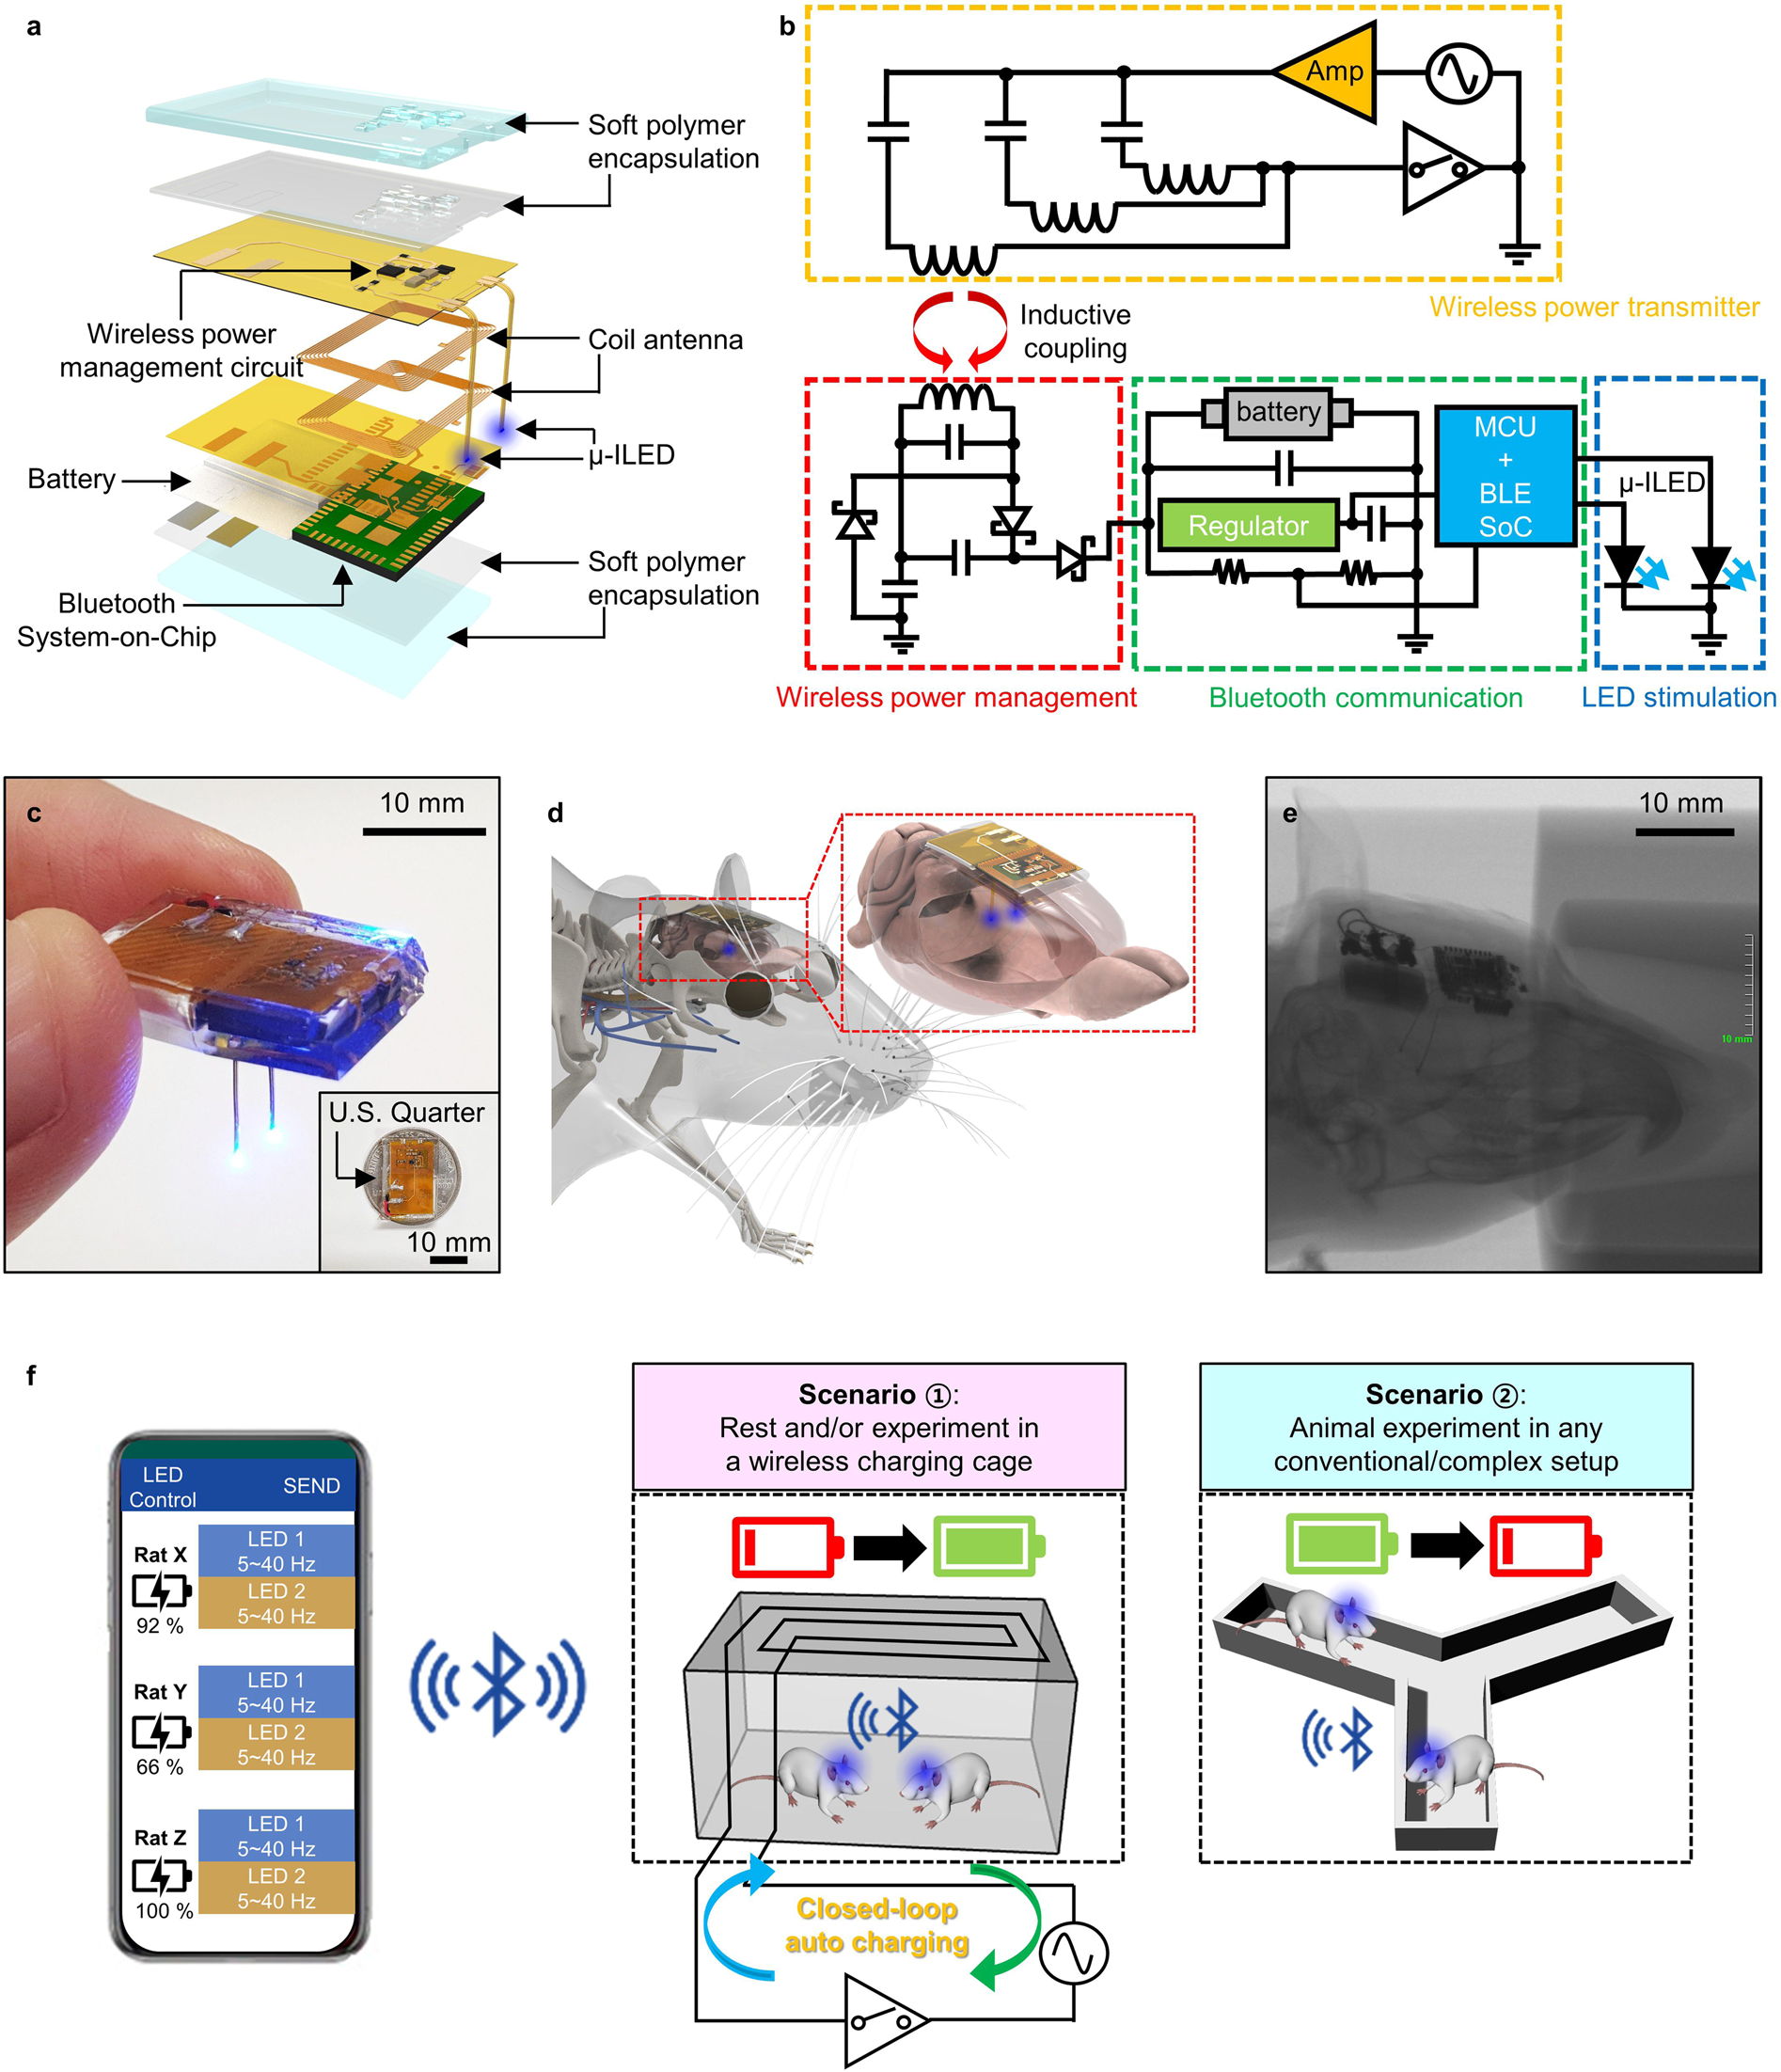 Soft subdermal implant of wireless battery charging and programmable controls for applications in optogenetics | Nature Communications